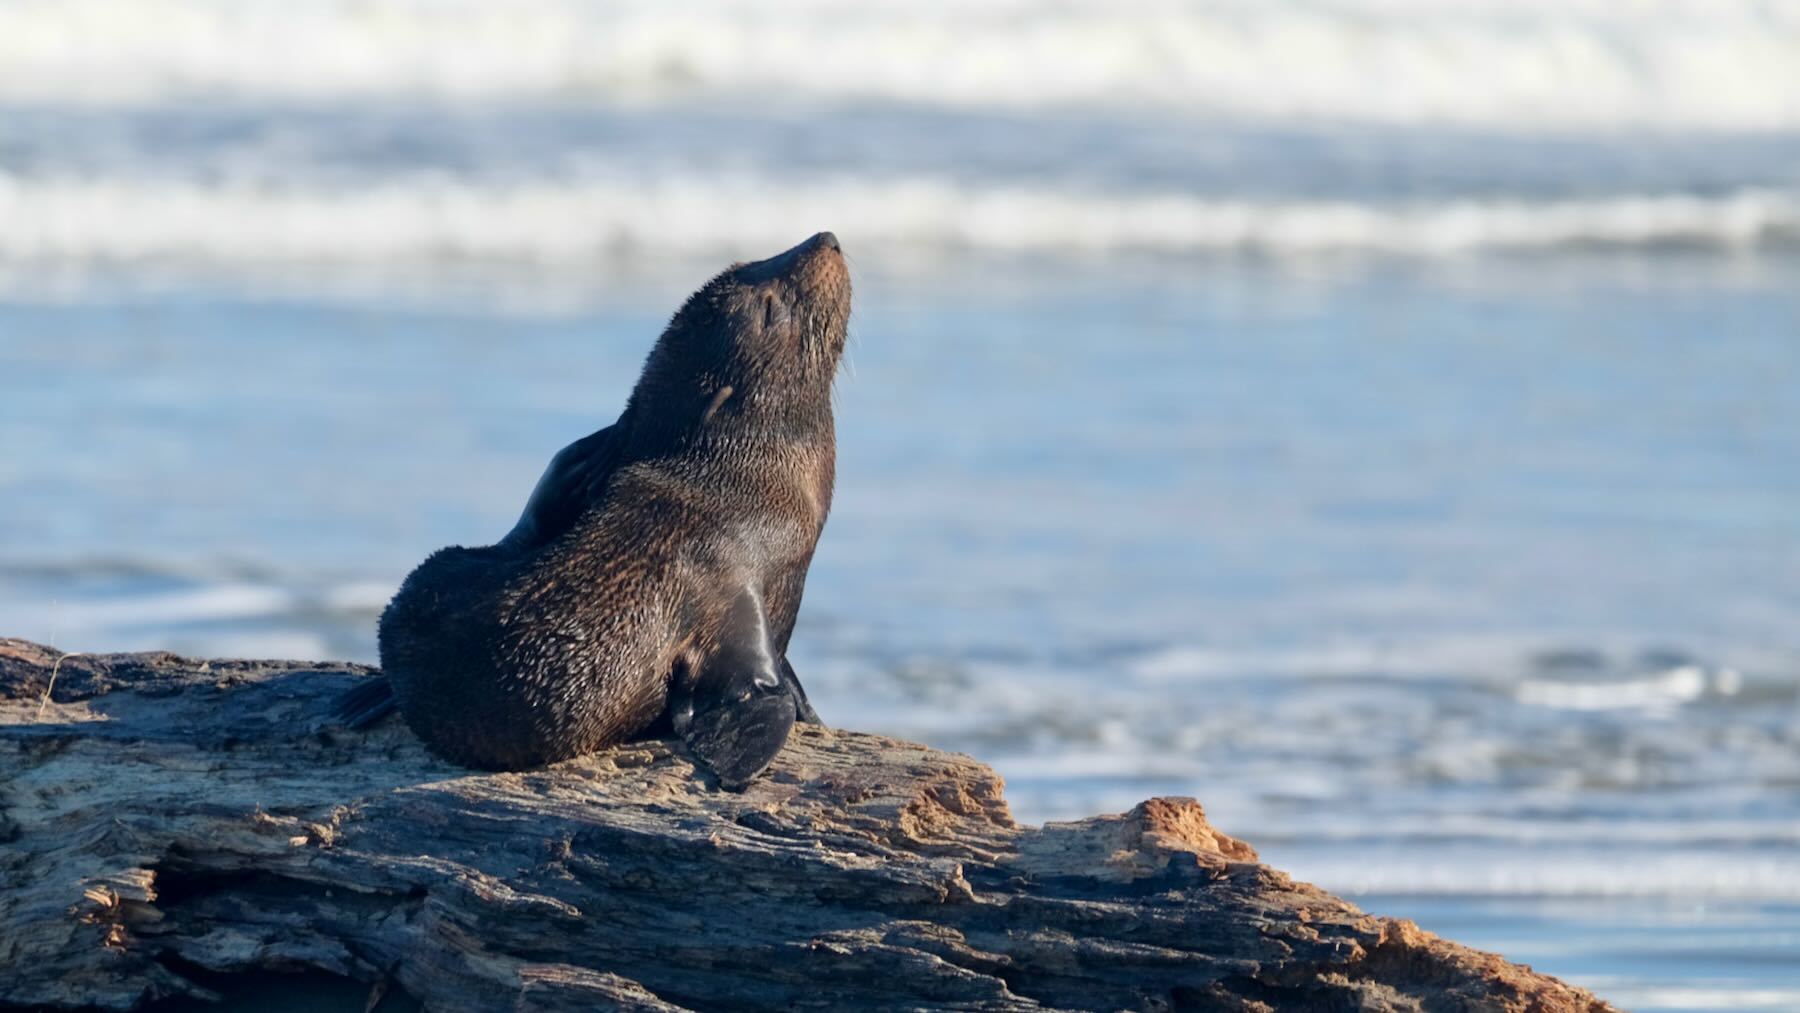 Seal pup perched on driftwood. 